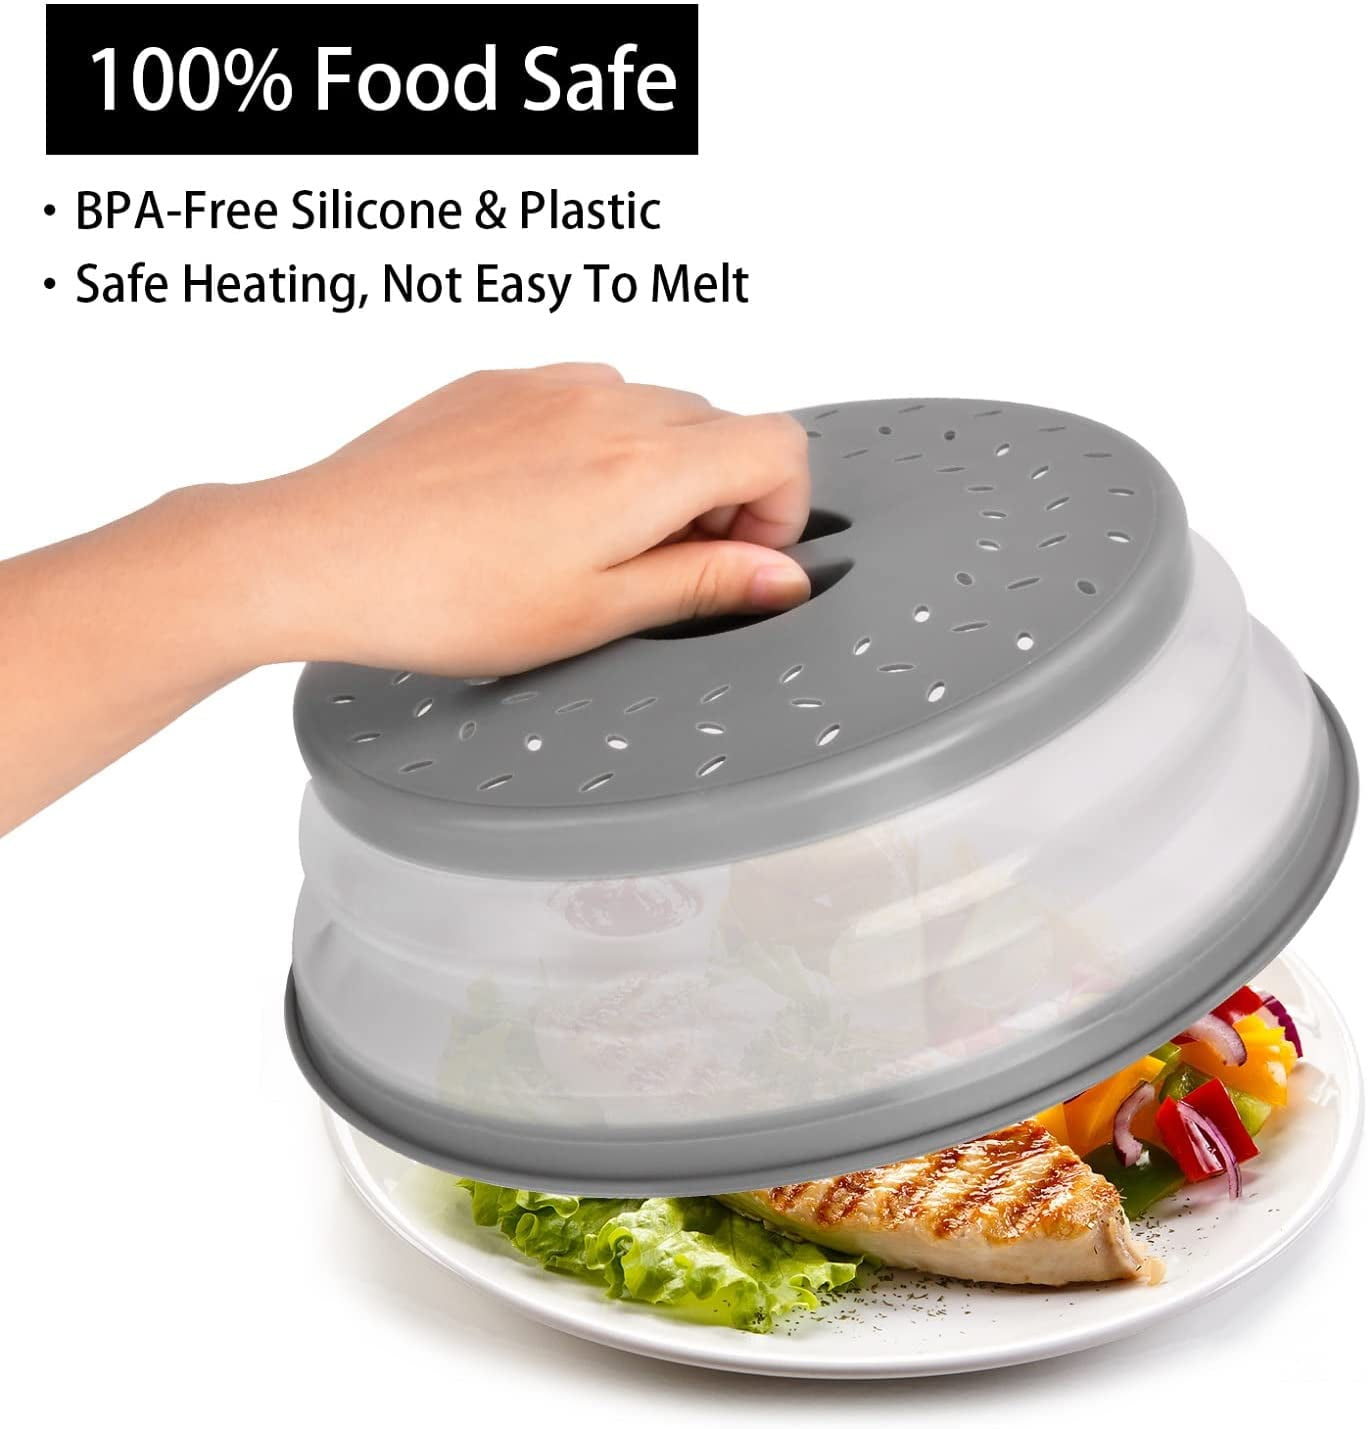 Microwave Cover Food Splatter Guard Lid Dish Covers Heating Silicone  Collapsible Plastic Exultimate